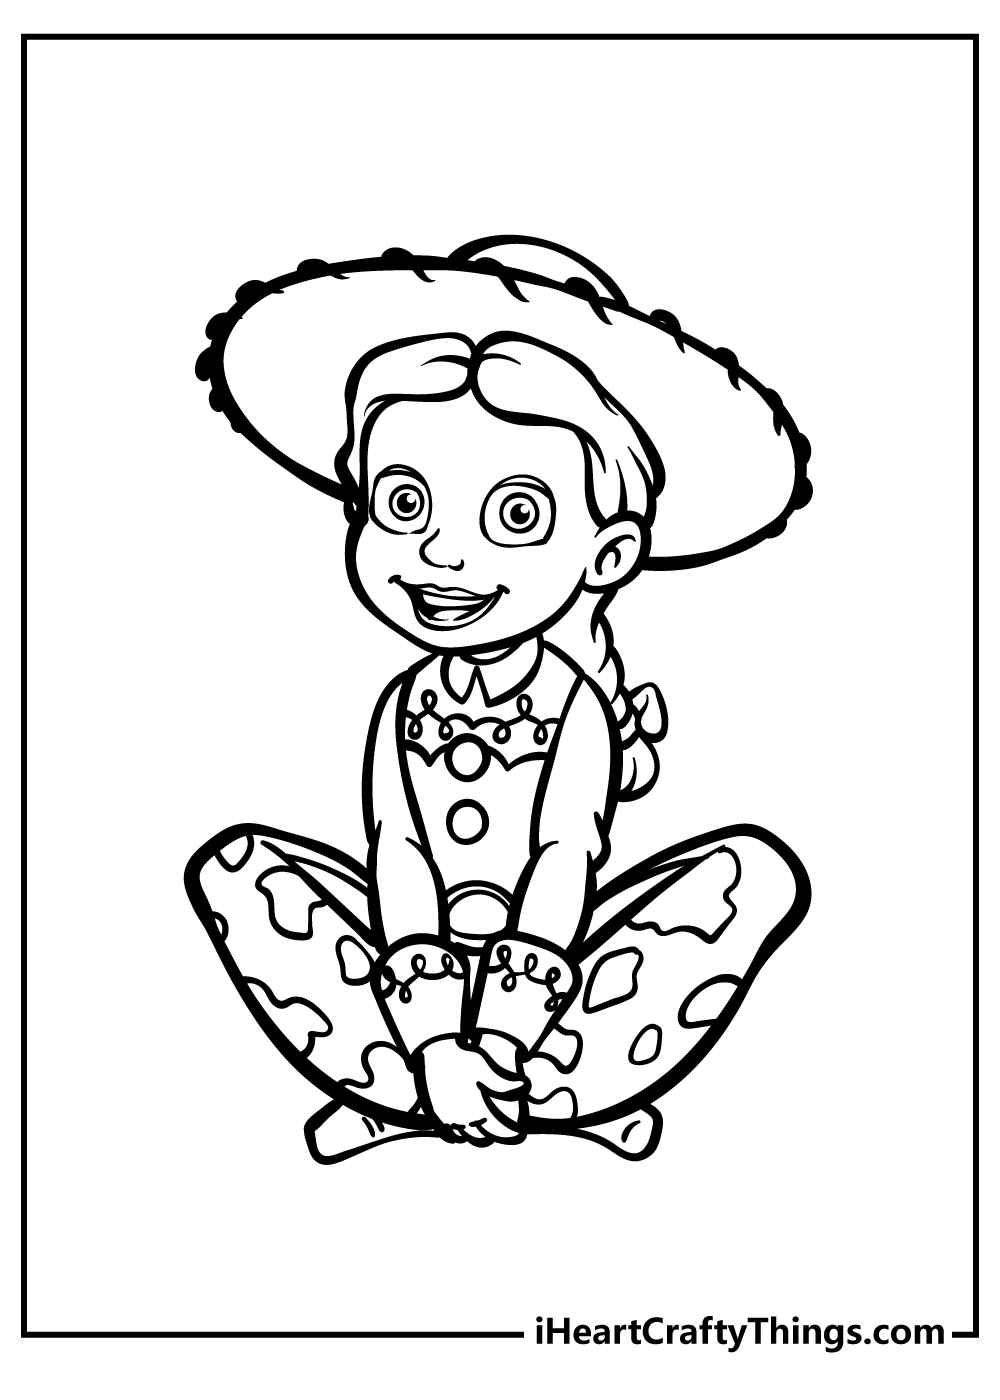 Toy Story coloring pages free printable